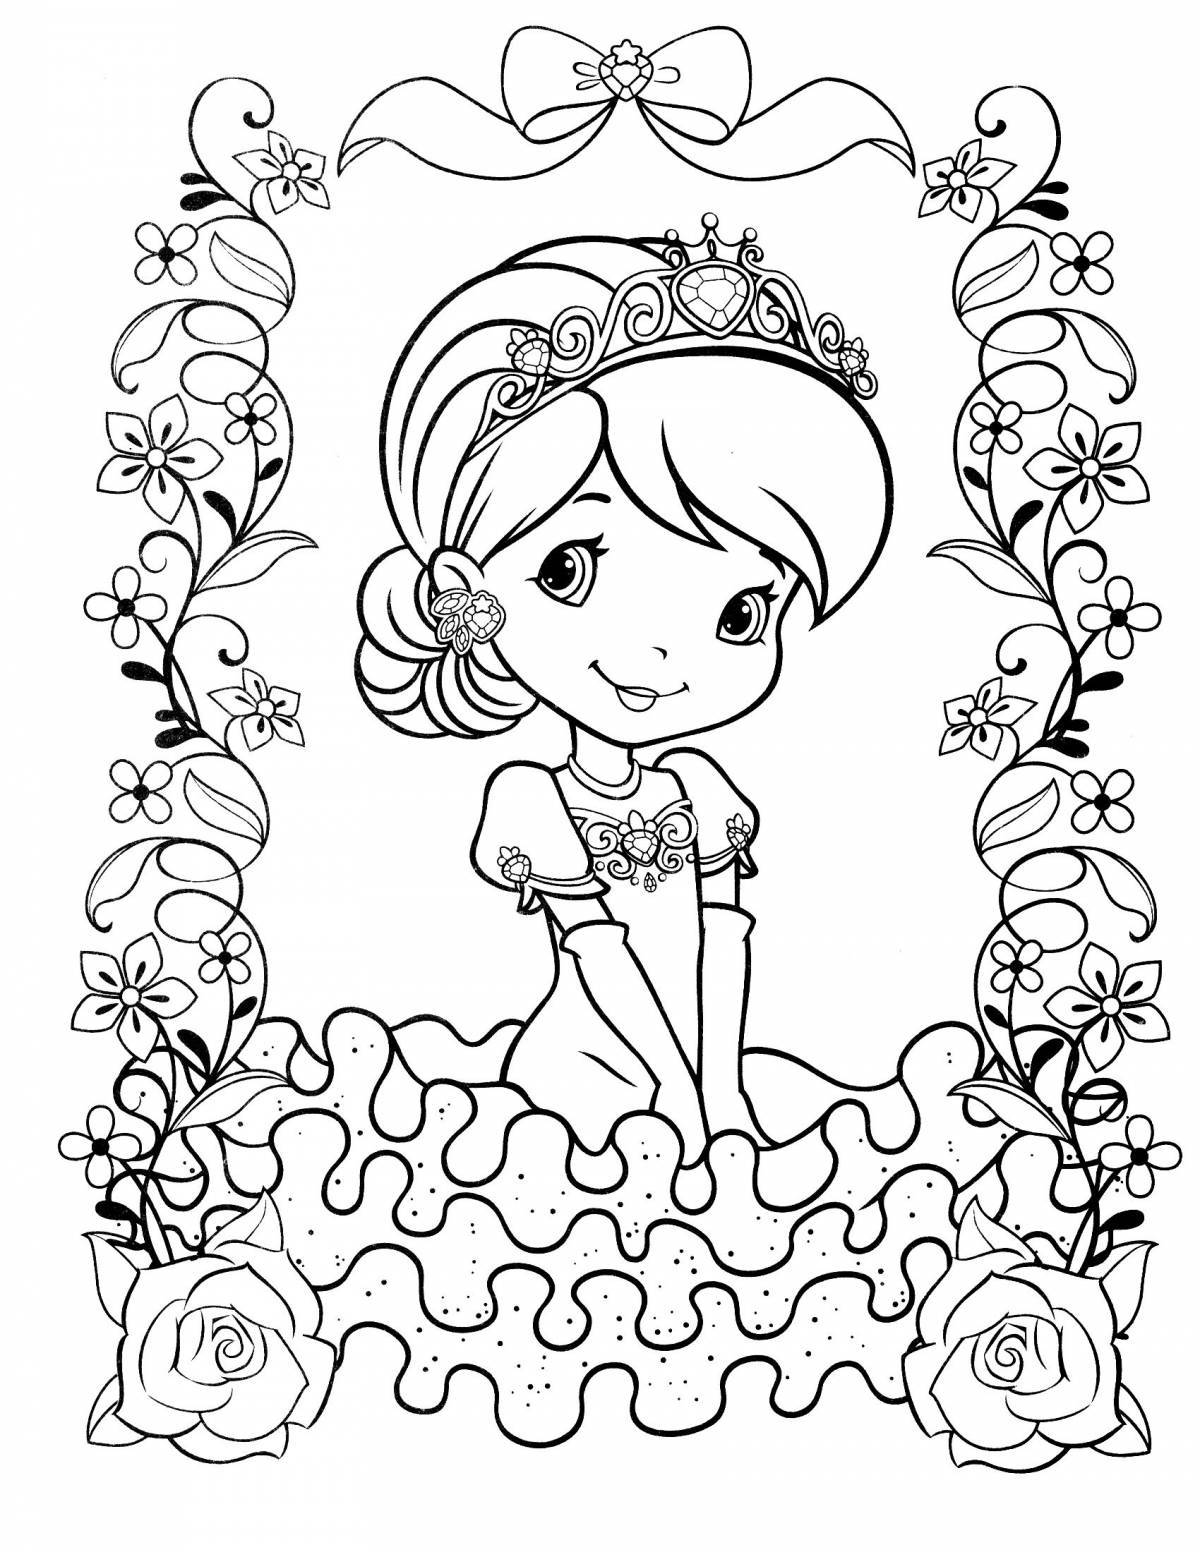 Great girls coloring pages